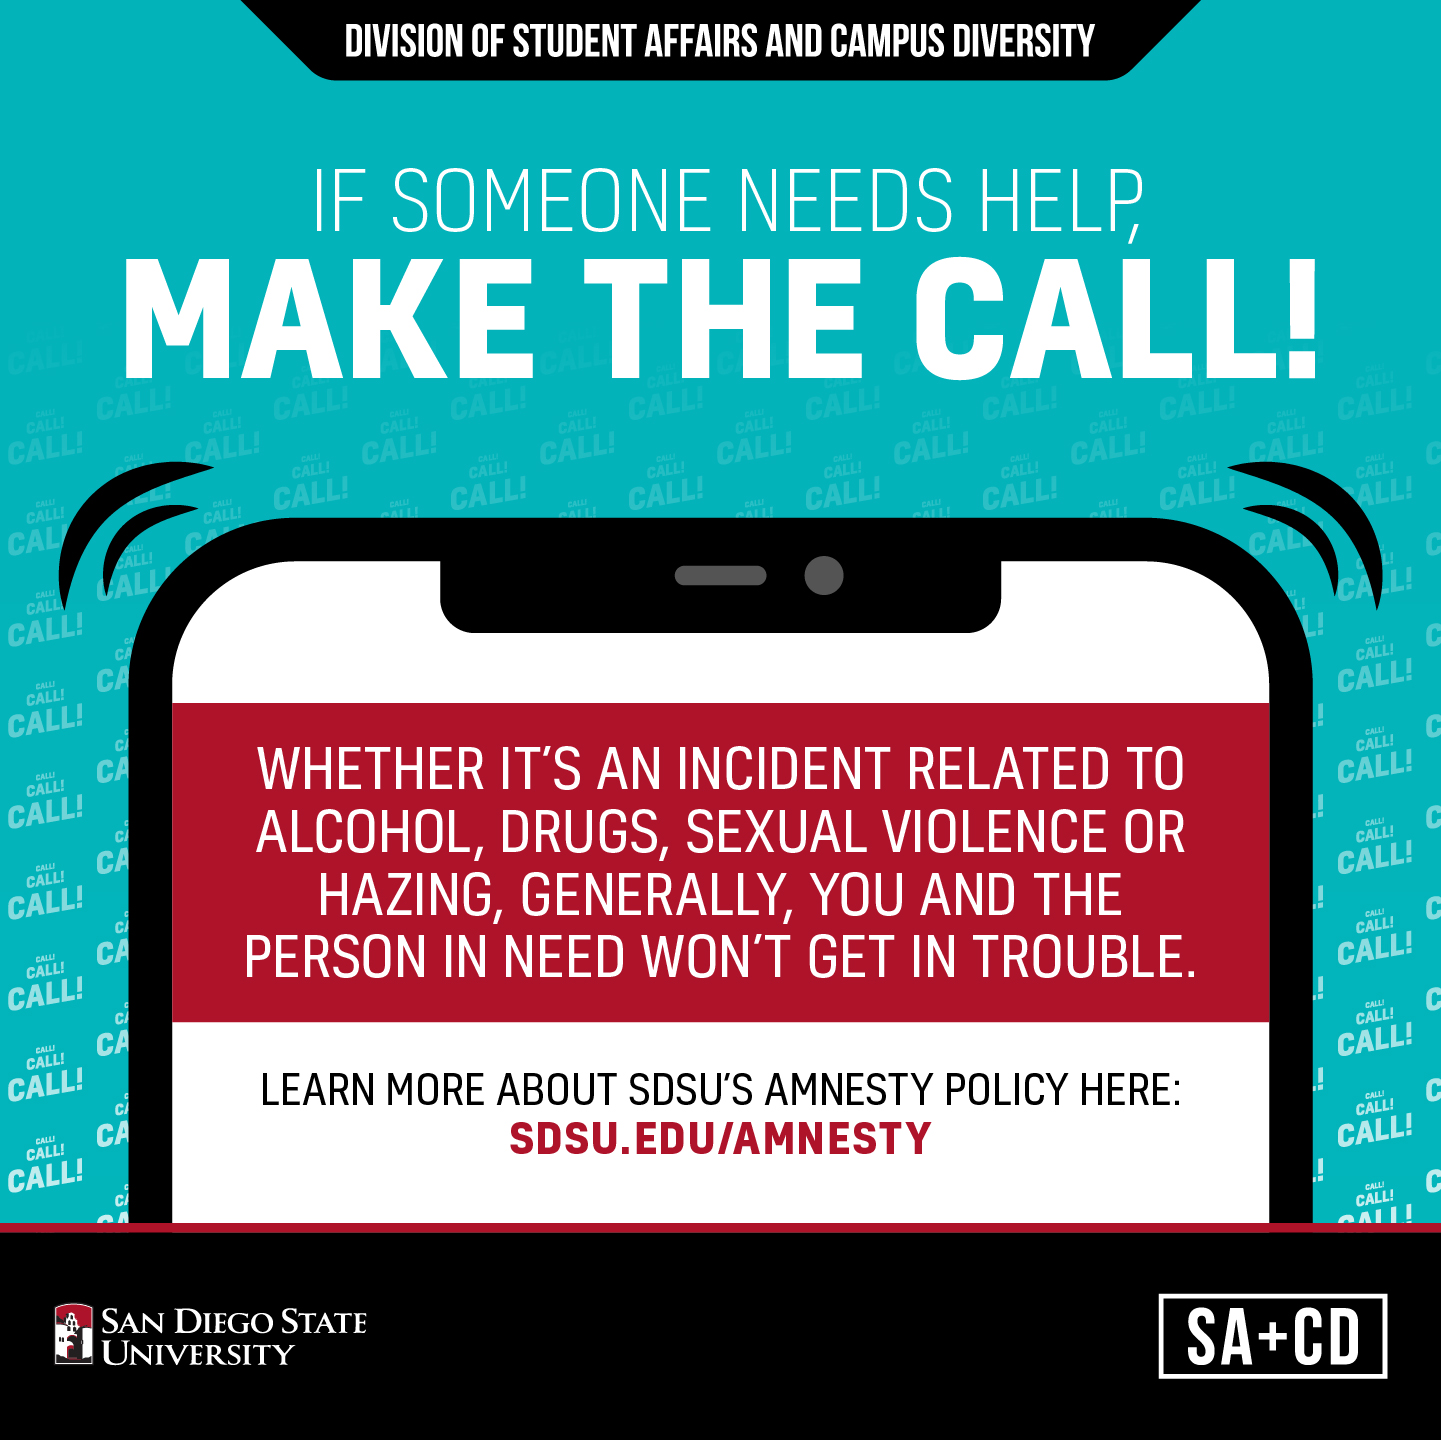 if someone needs help, make the call - you and the person in need won't get in trouble. See sdsu.edu/amnesty